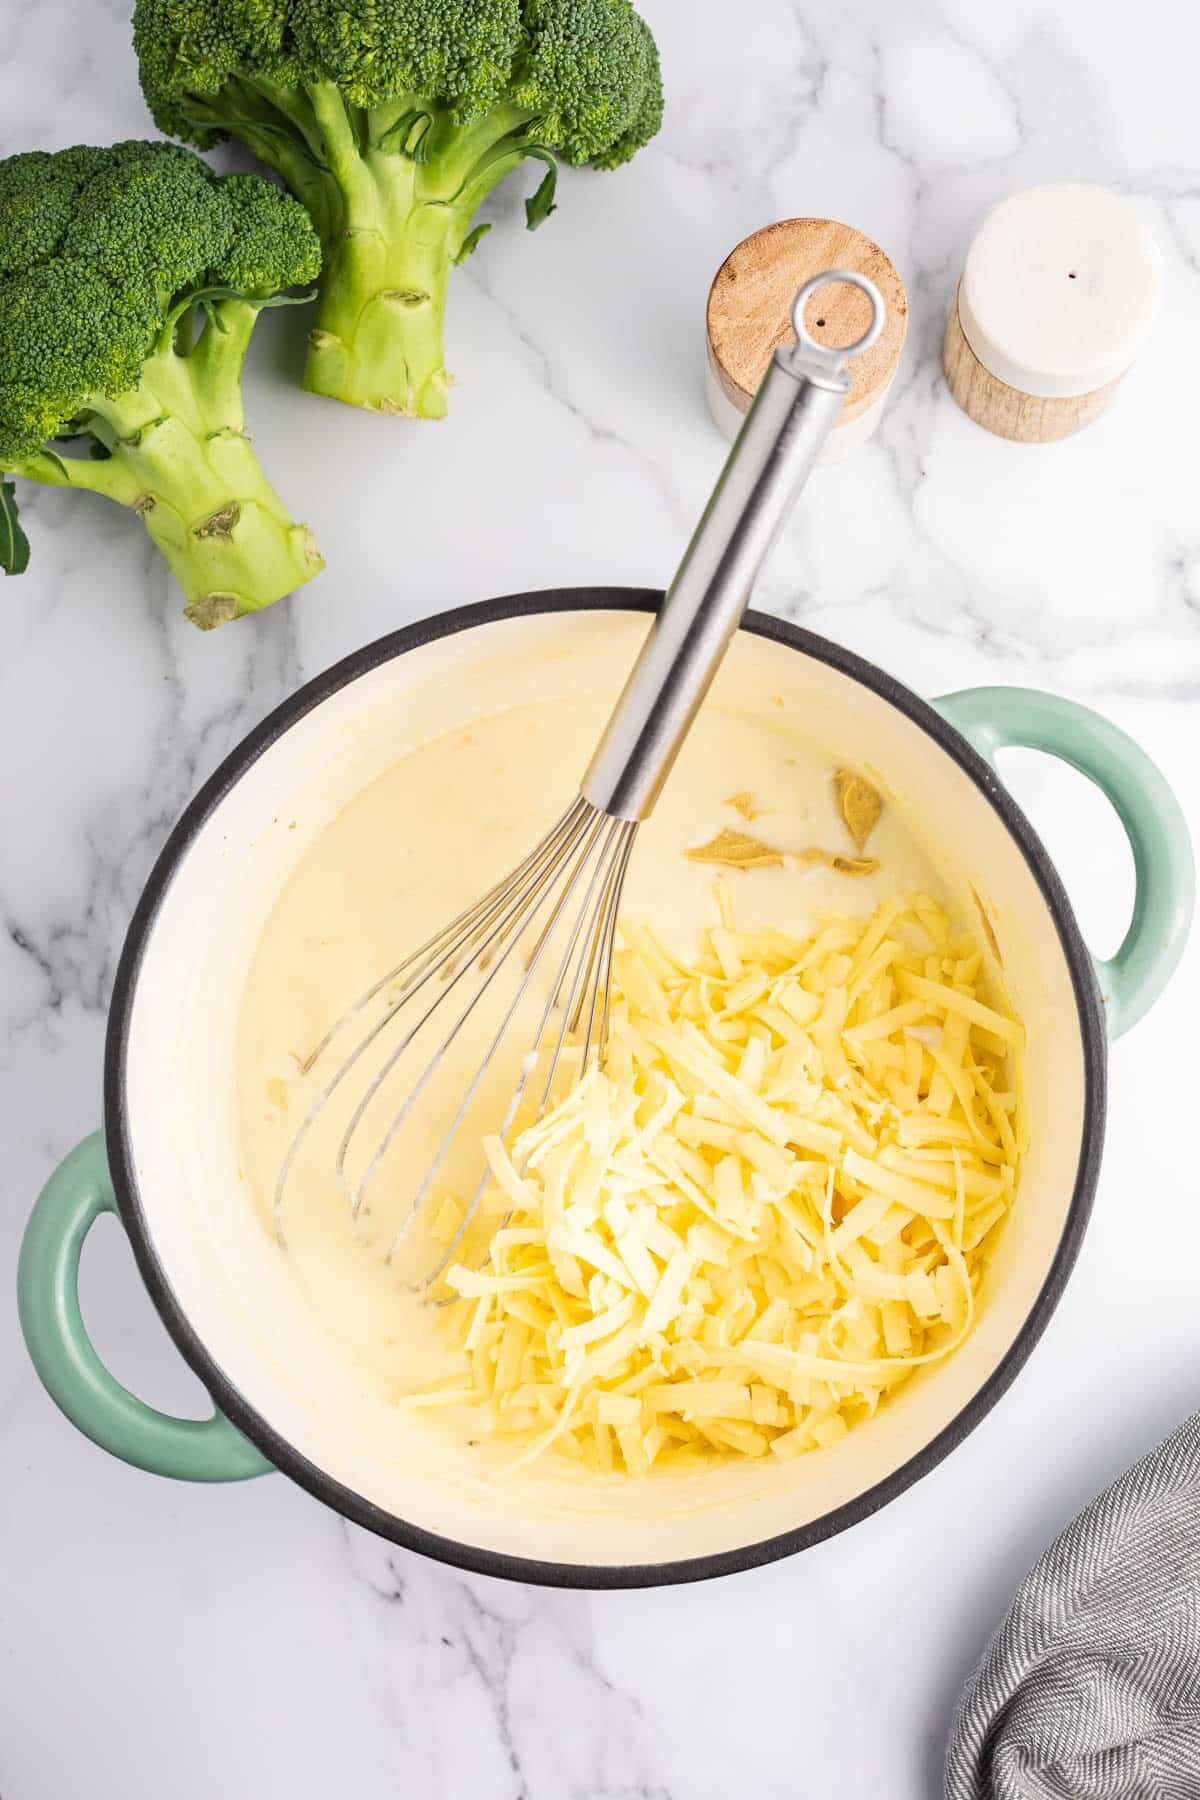 Cheesy and dijon mustard being added to the cheese sauce.